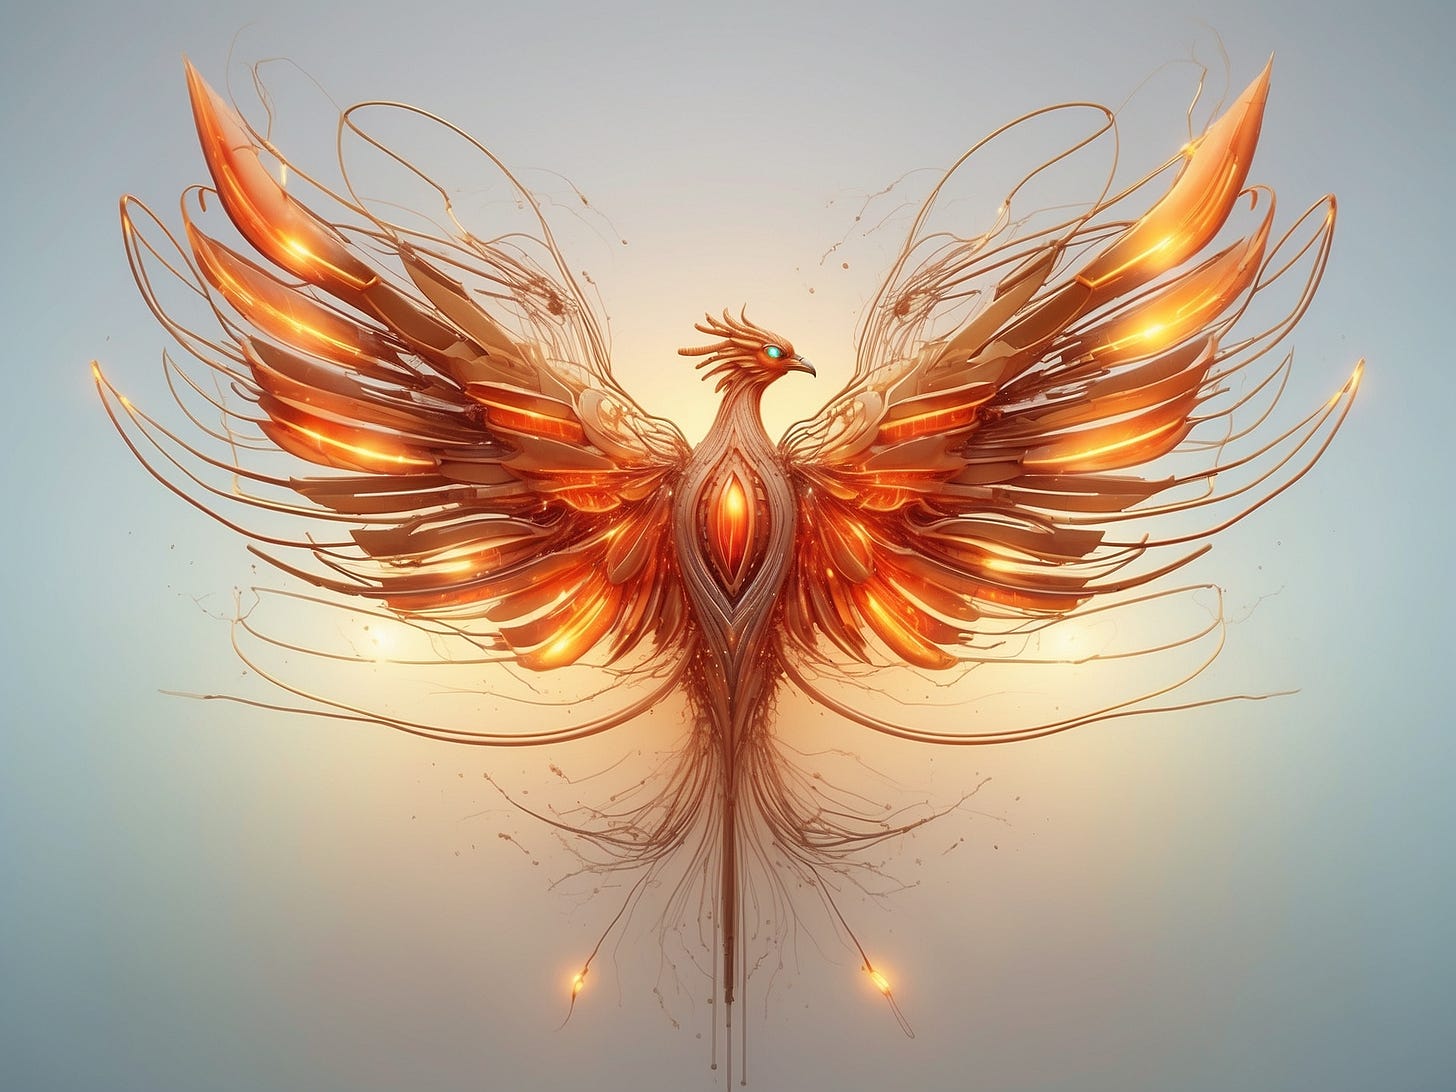 An intricate and radiant phoenix in mid-flight, with shimmering golden-orange wings unfurled against a soft blue background. The phoenix's body glows with an inner light, and its feathers appear to be made of delicate, flowing filaments.